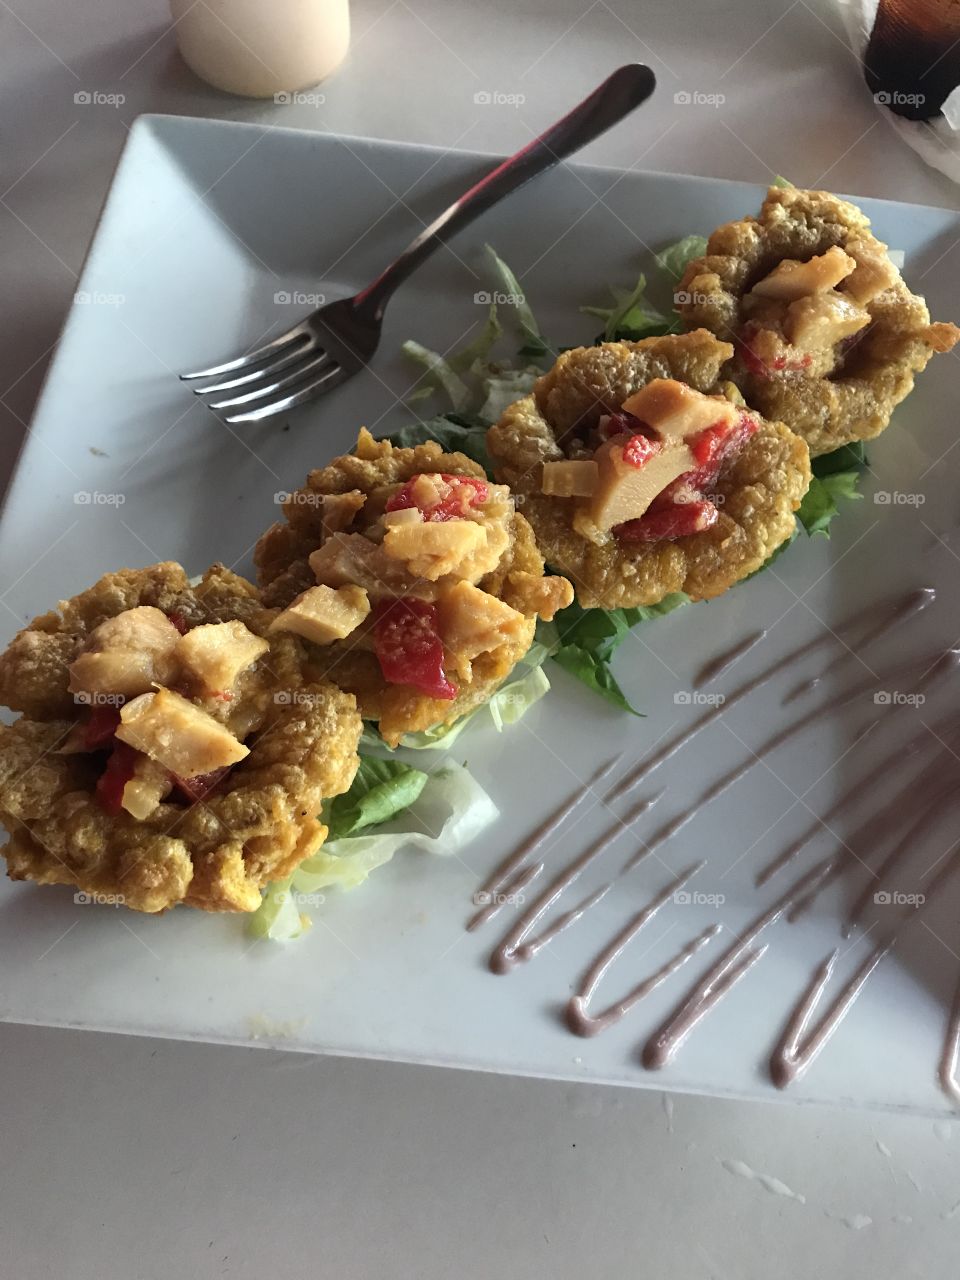 A Puerto Rican dish of plantain cups stuffed with fresh fish and peppers